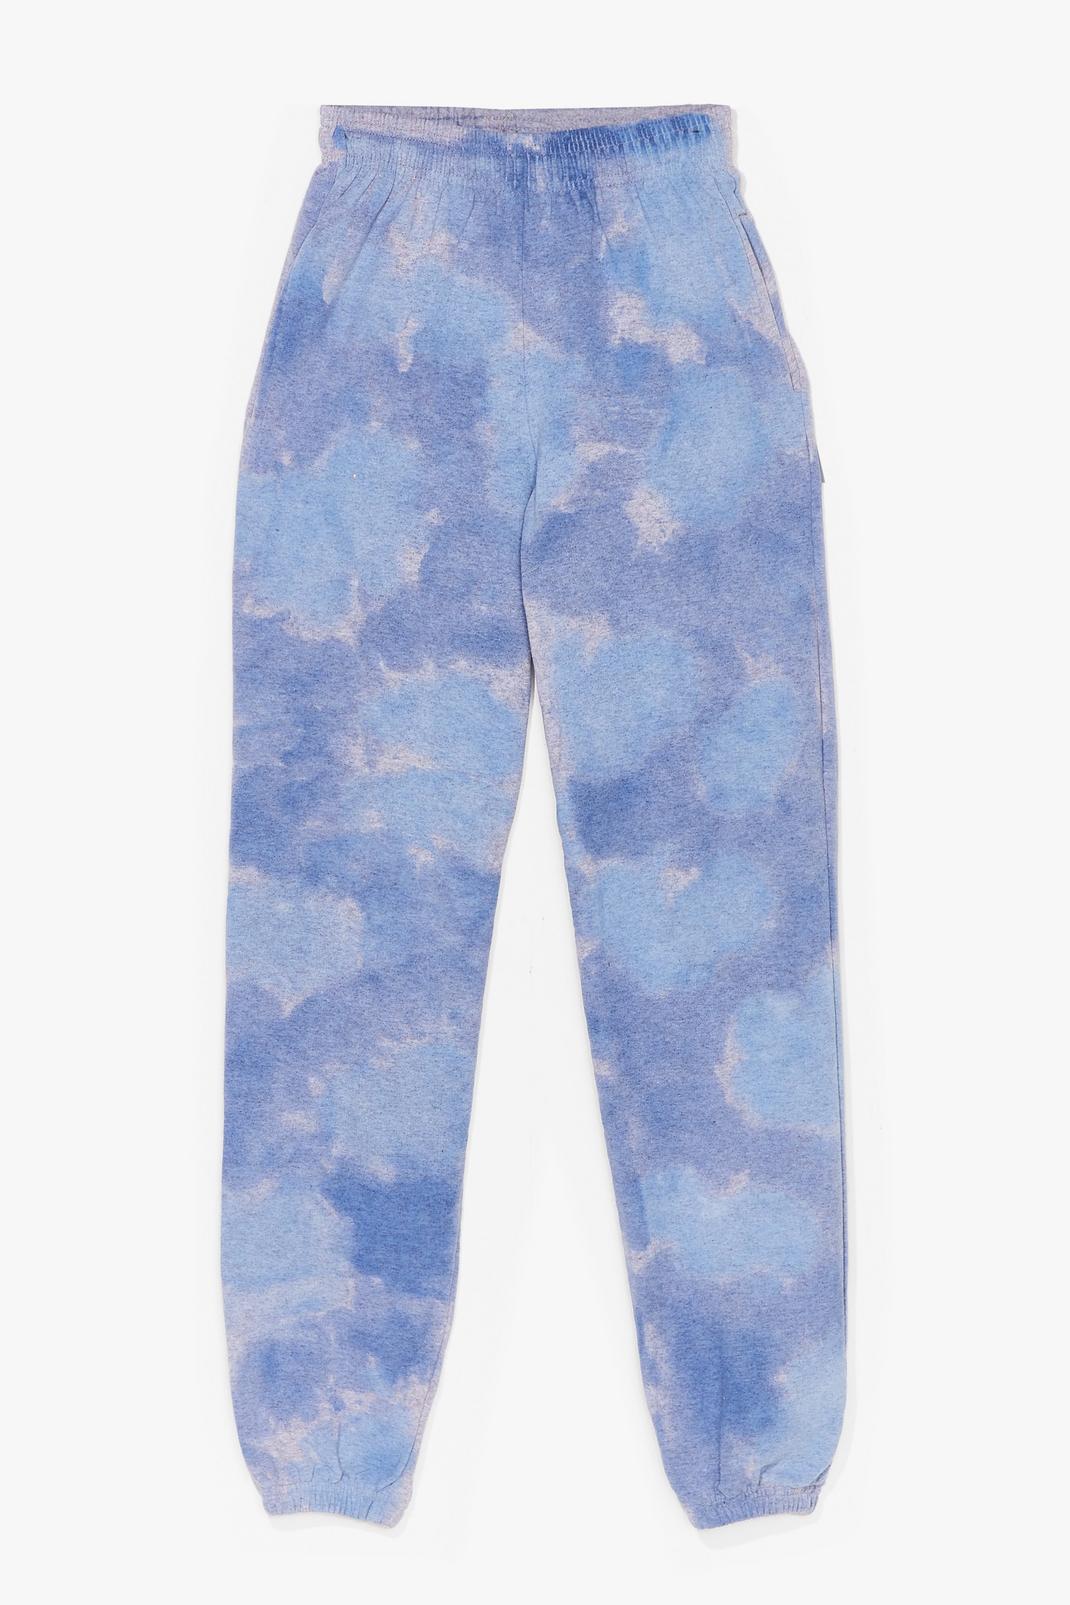 Blue Head in the Clouds High-Waisted Tie Dye Tracksuit Pants image number 1